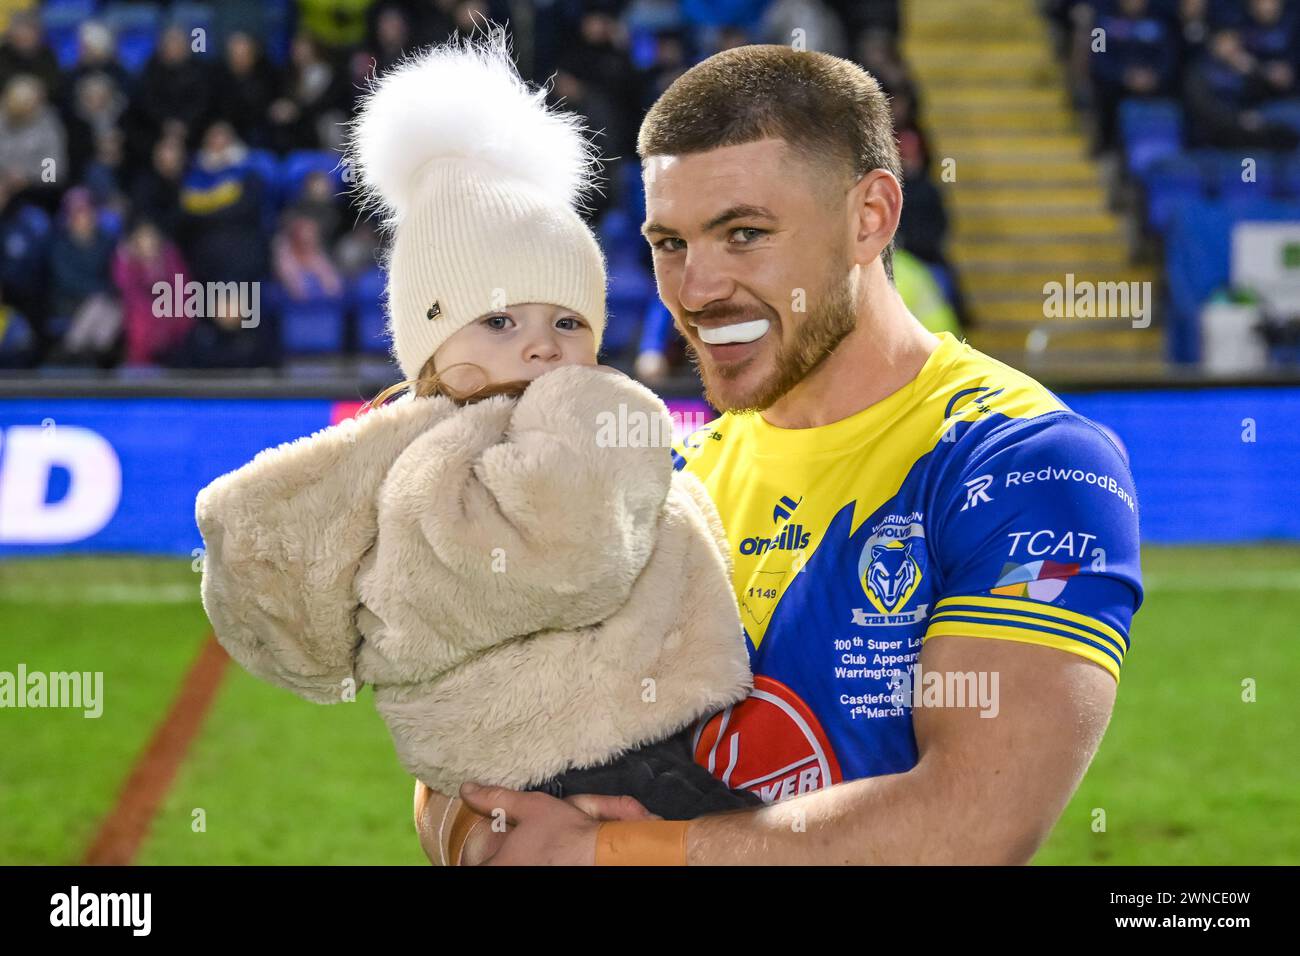 Danny Walker of Warrington Wolves ahead of the Betfred Super League Round 3 match Warrington Wolves vs Castleford Tigers at Halliwell Jones Stadium, Warrington, United Kingdom, 1st March 2024  (Photo by Craig Thomas/News Images) Stock Photo